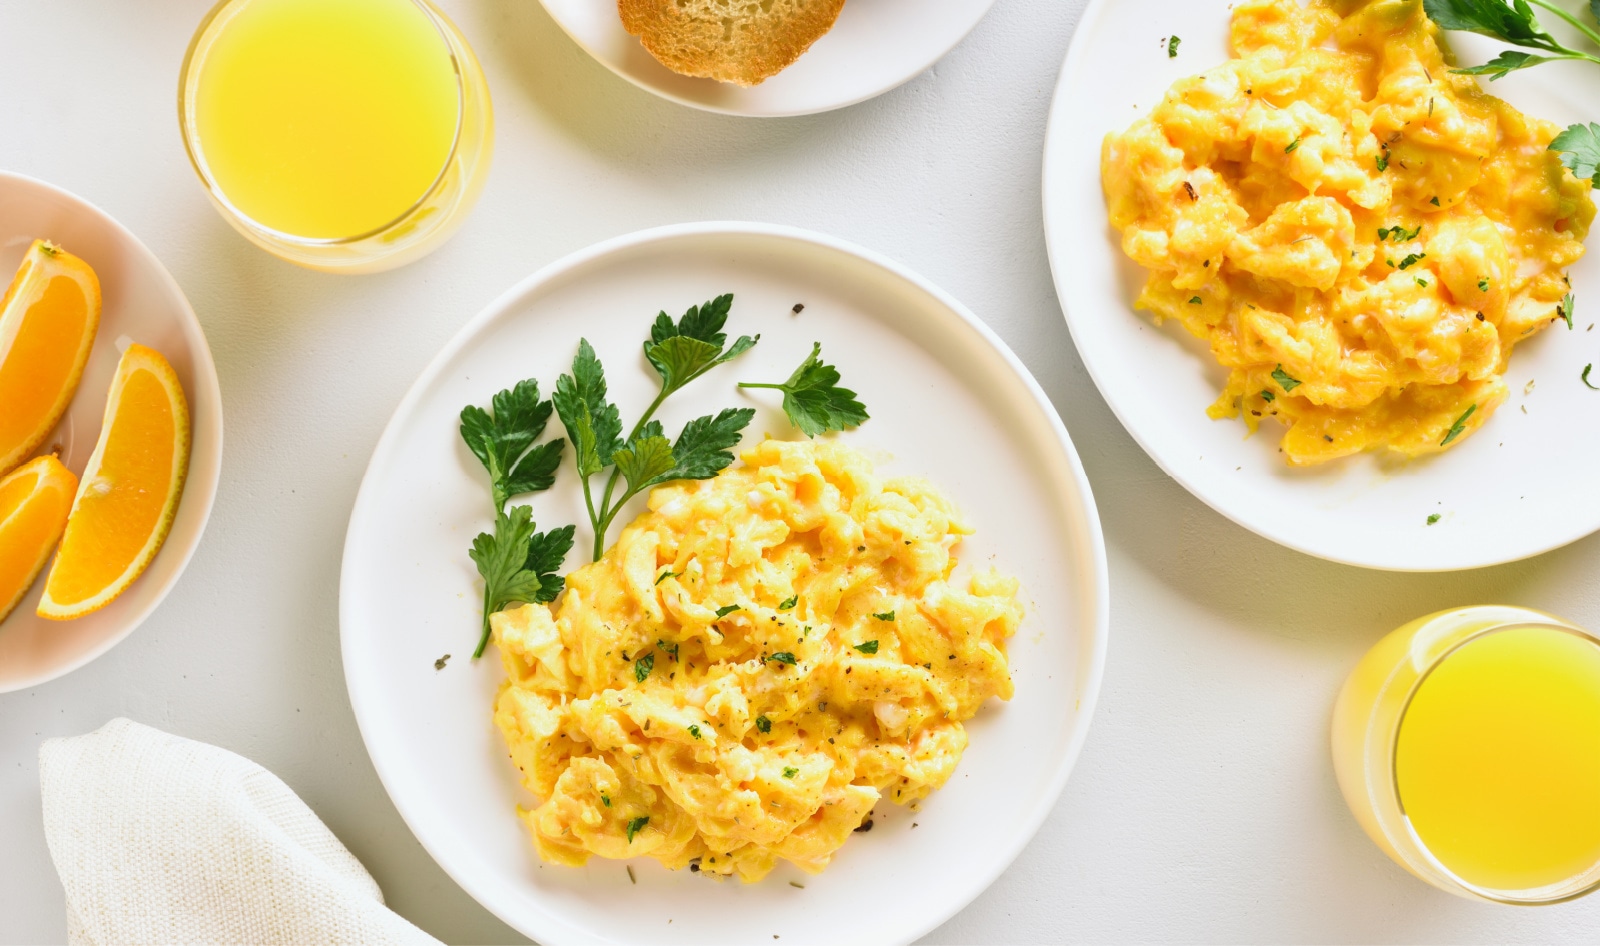 Vega Founder's New Cell-Based Scramble Is More Nutritious Than Chicken Eggs